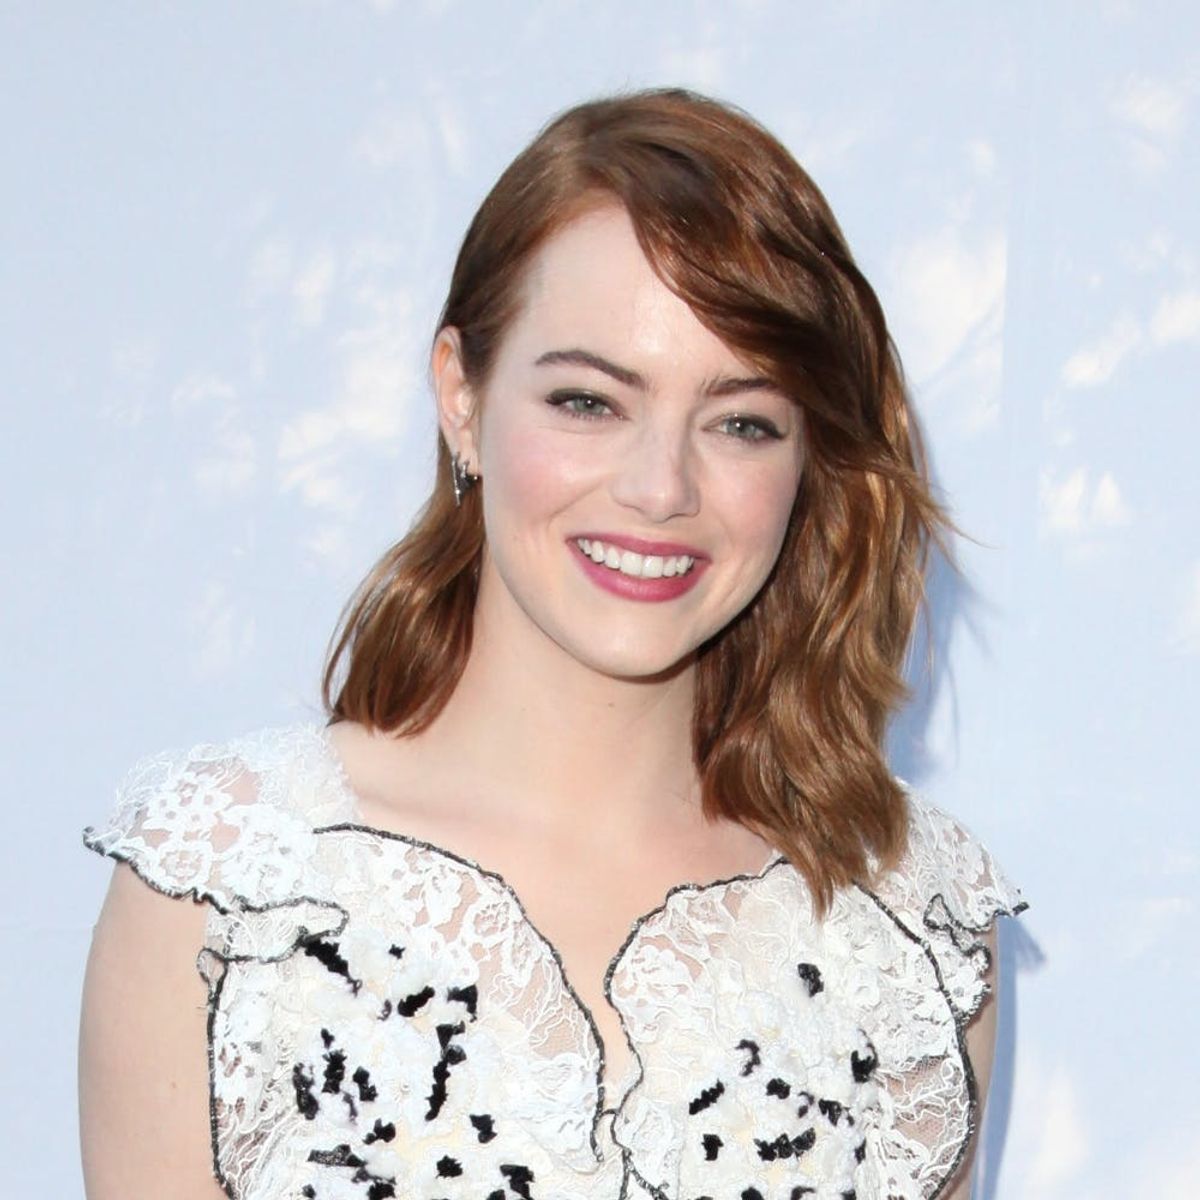 Emma Stone Is Now Slaying a Pixie Cut